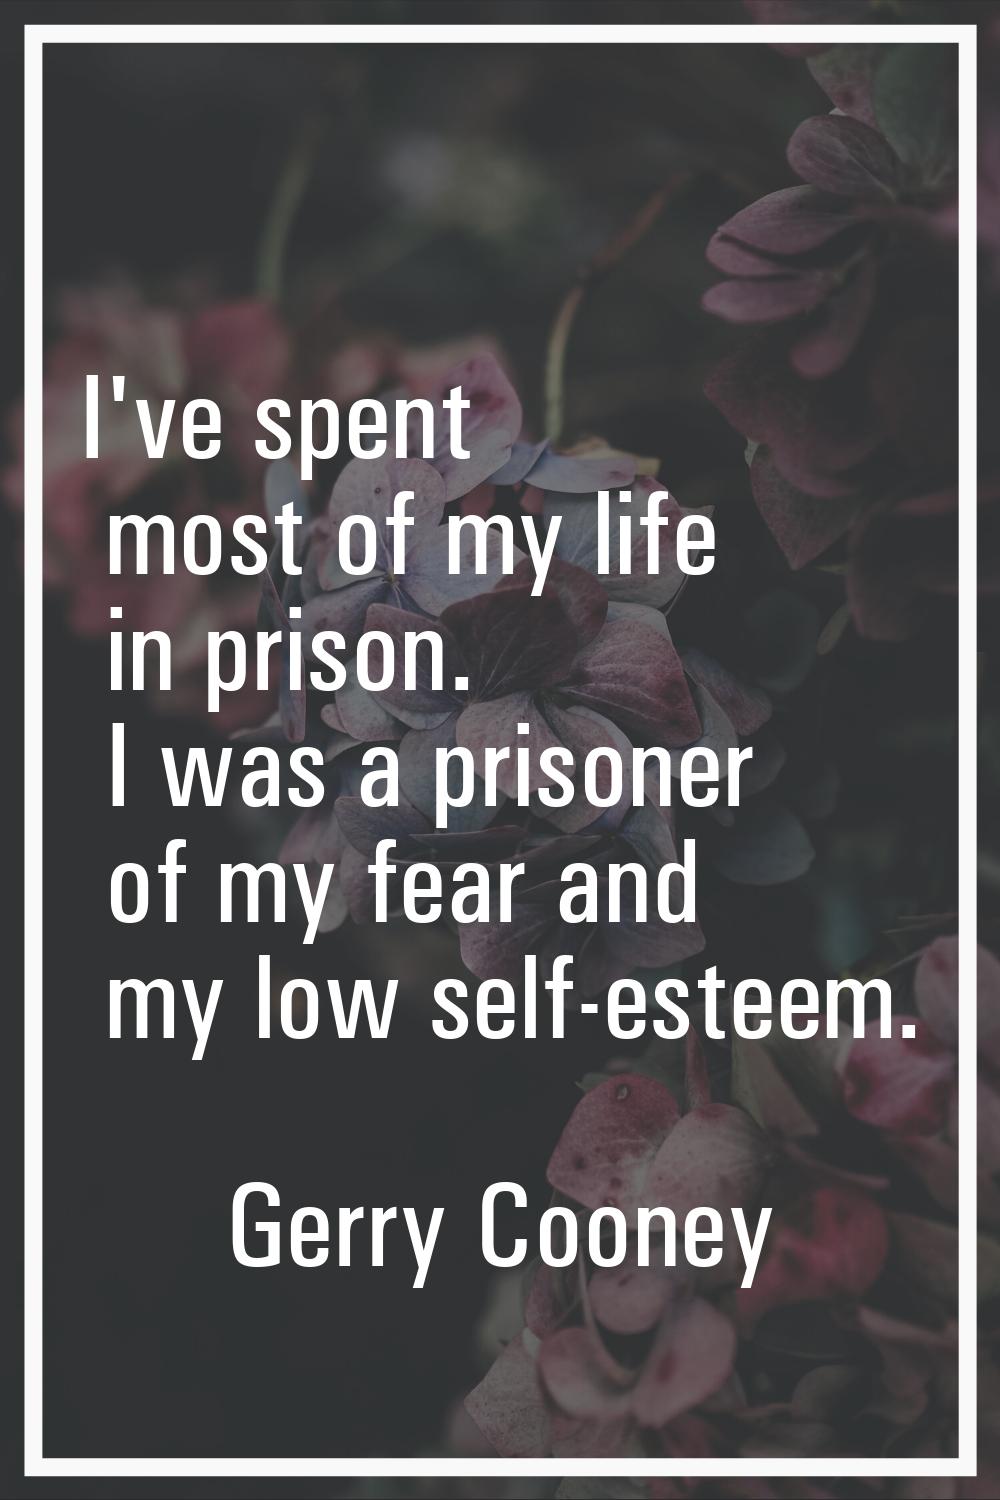 I've spent most of my life in prison. I was a prisoner of my fear and my low self-esteem.